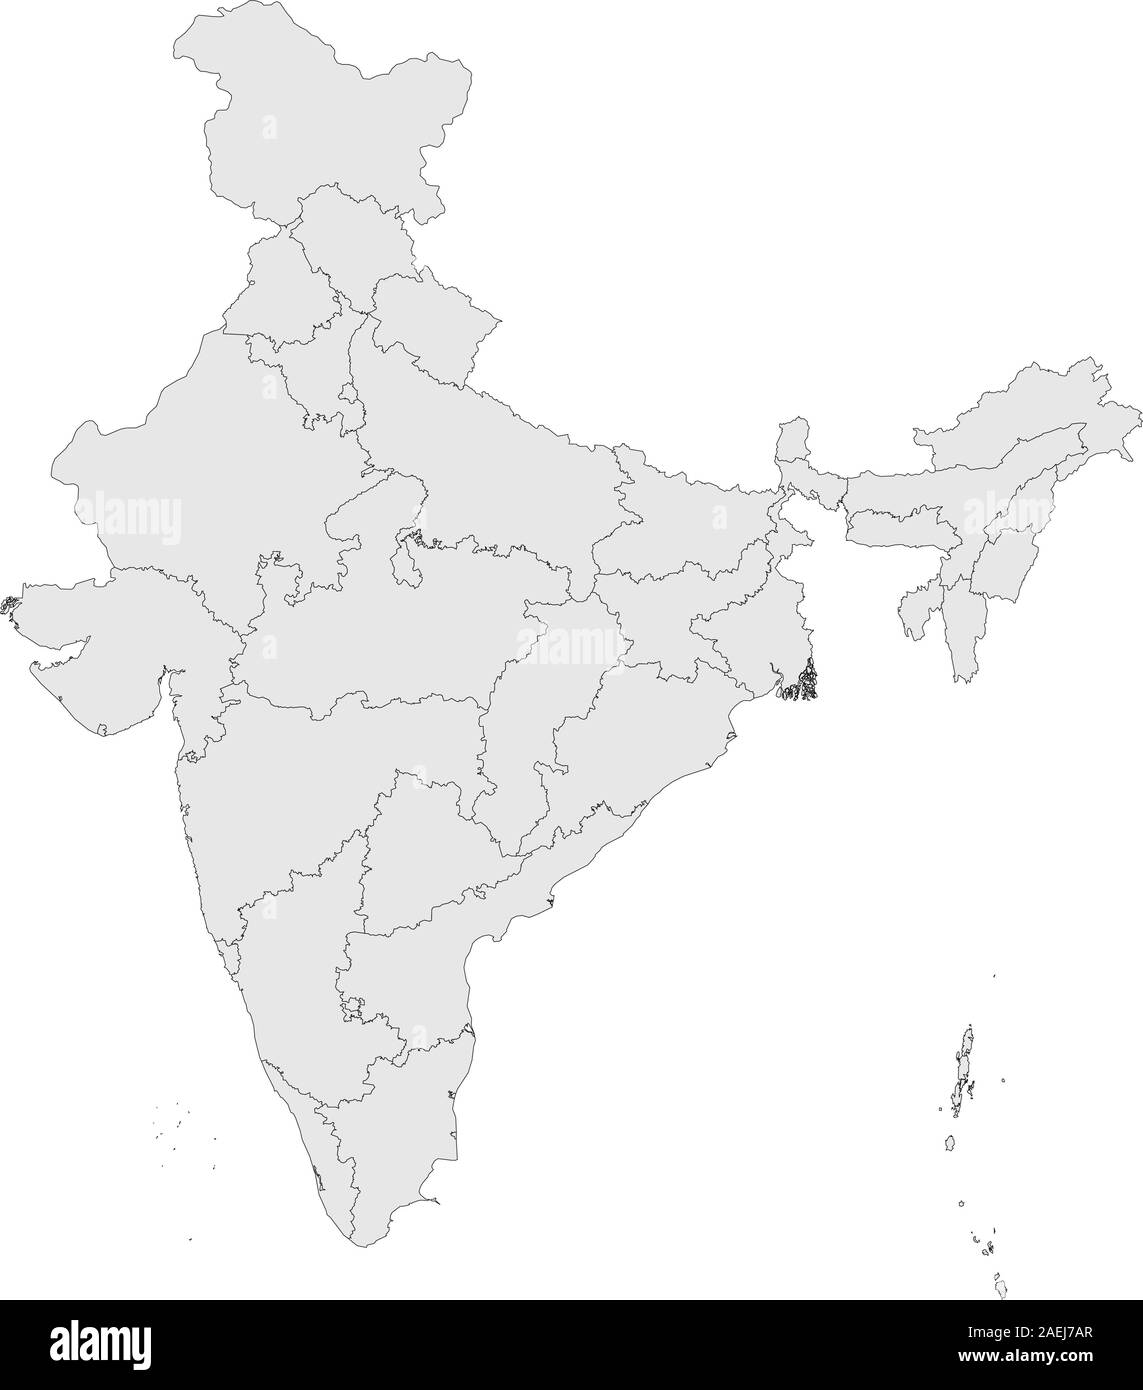 India political map Black and White Stock Photos & Images - Alamy